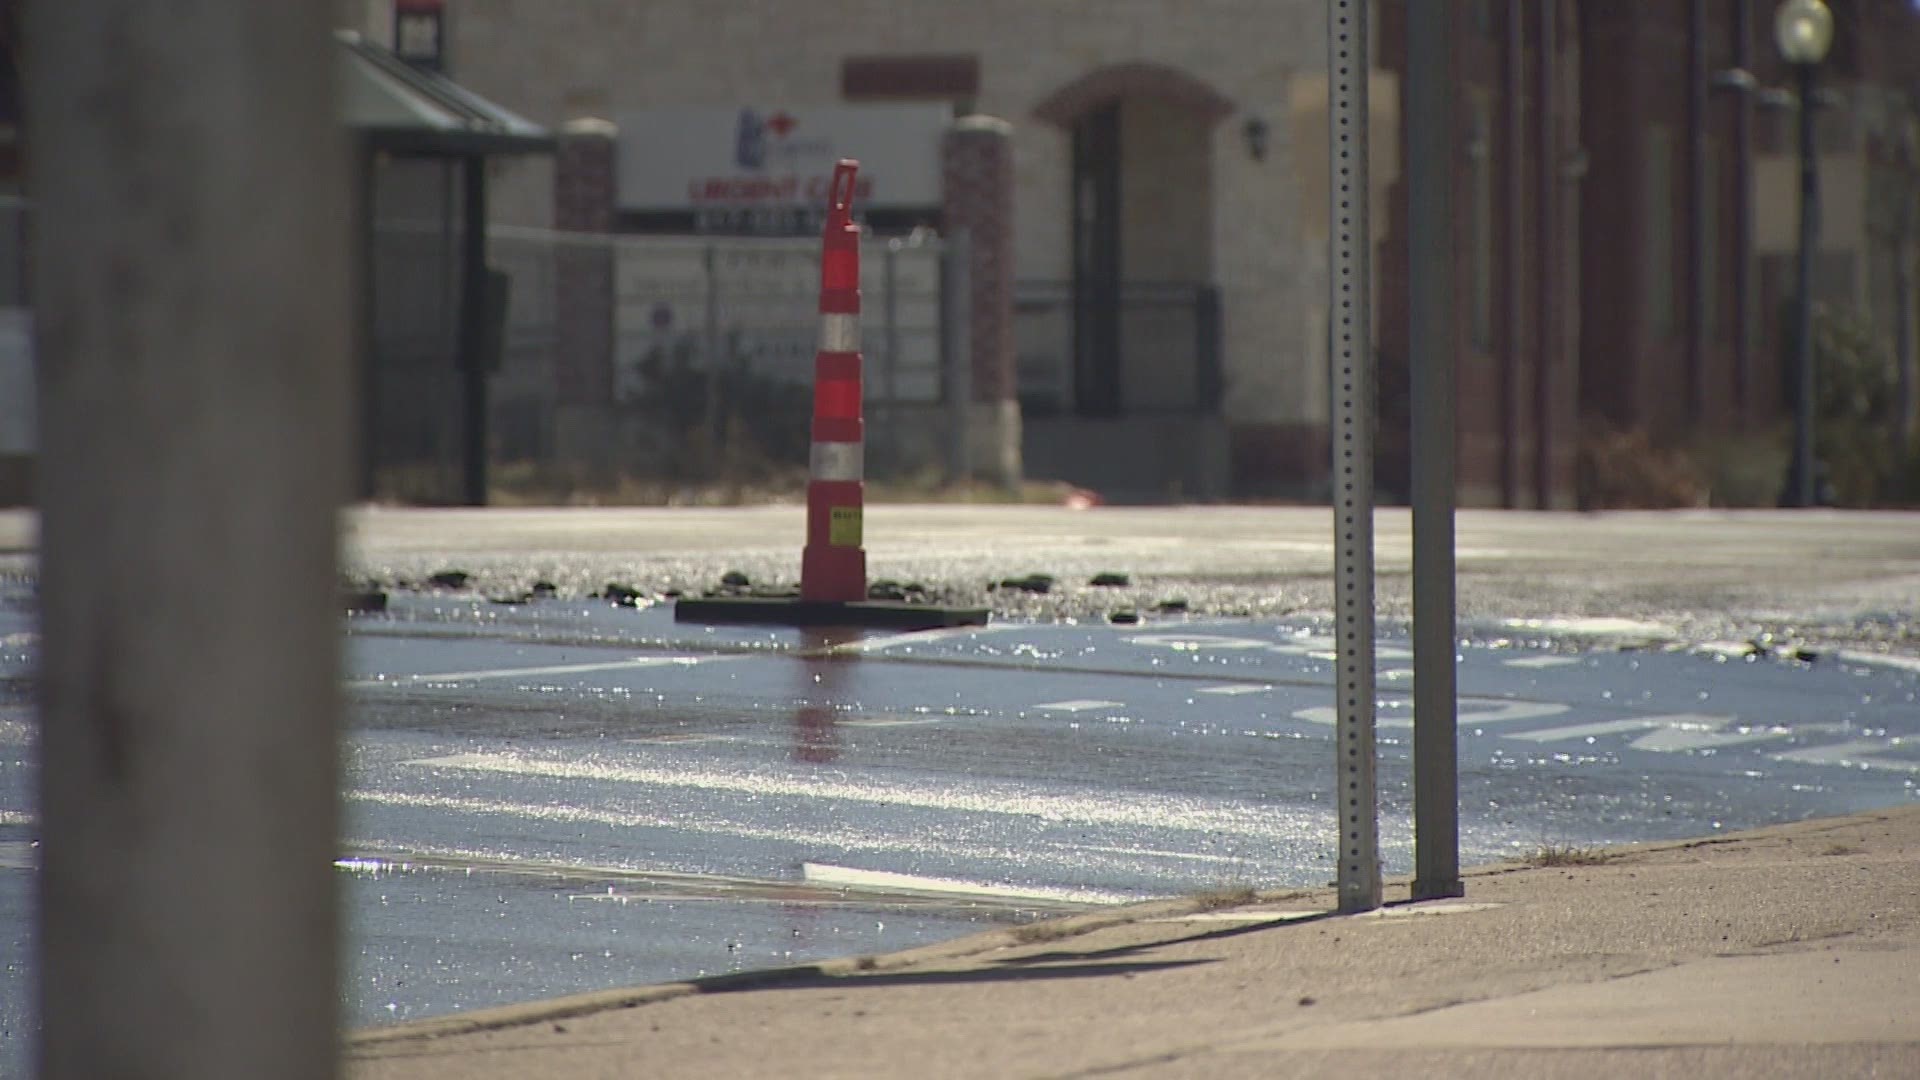 As of Monday morning, the city was also looking into an additional 83 possible water main breaks.